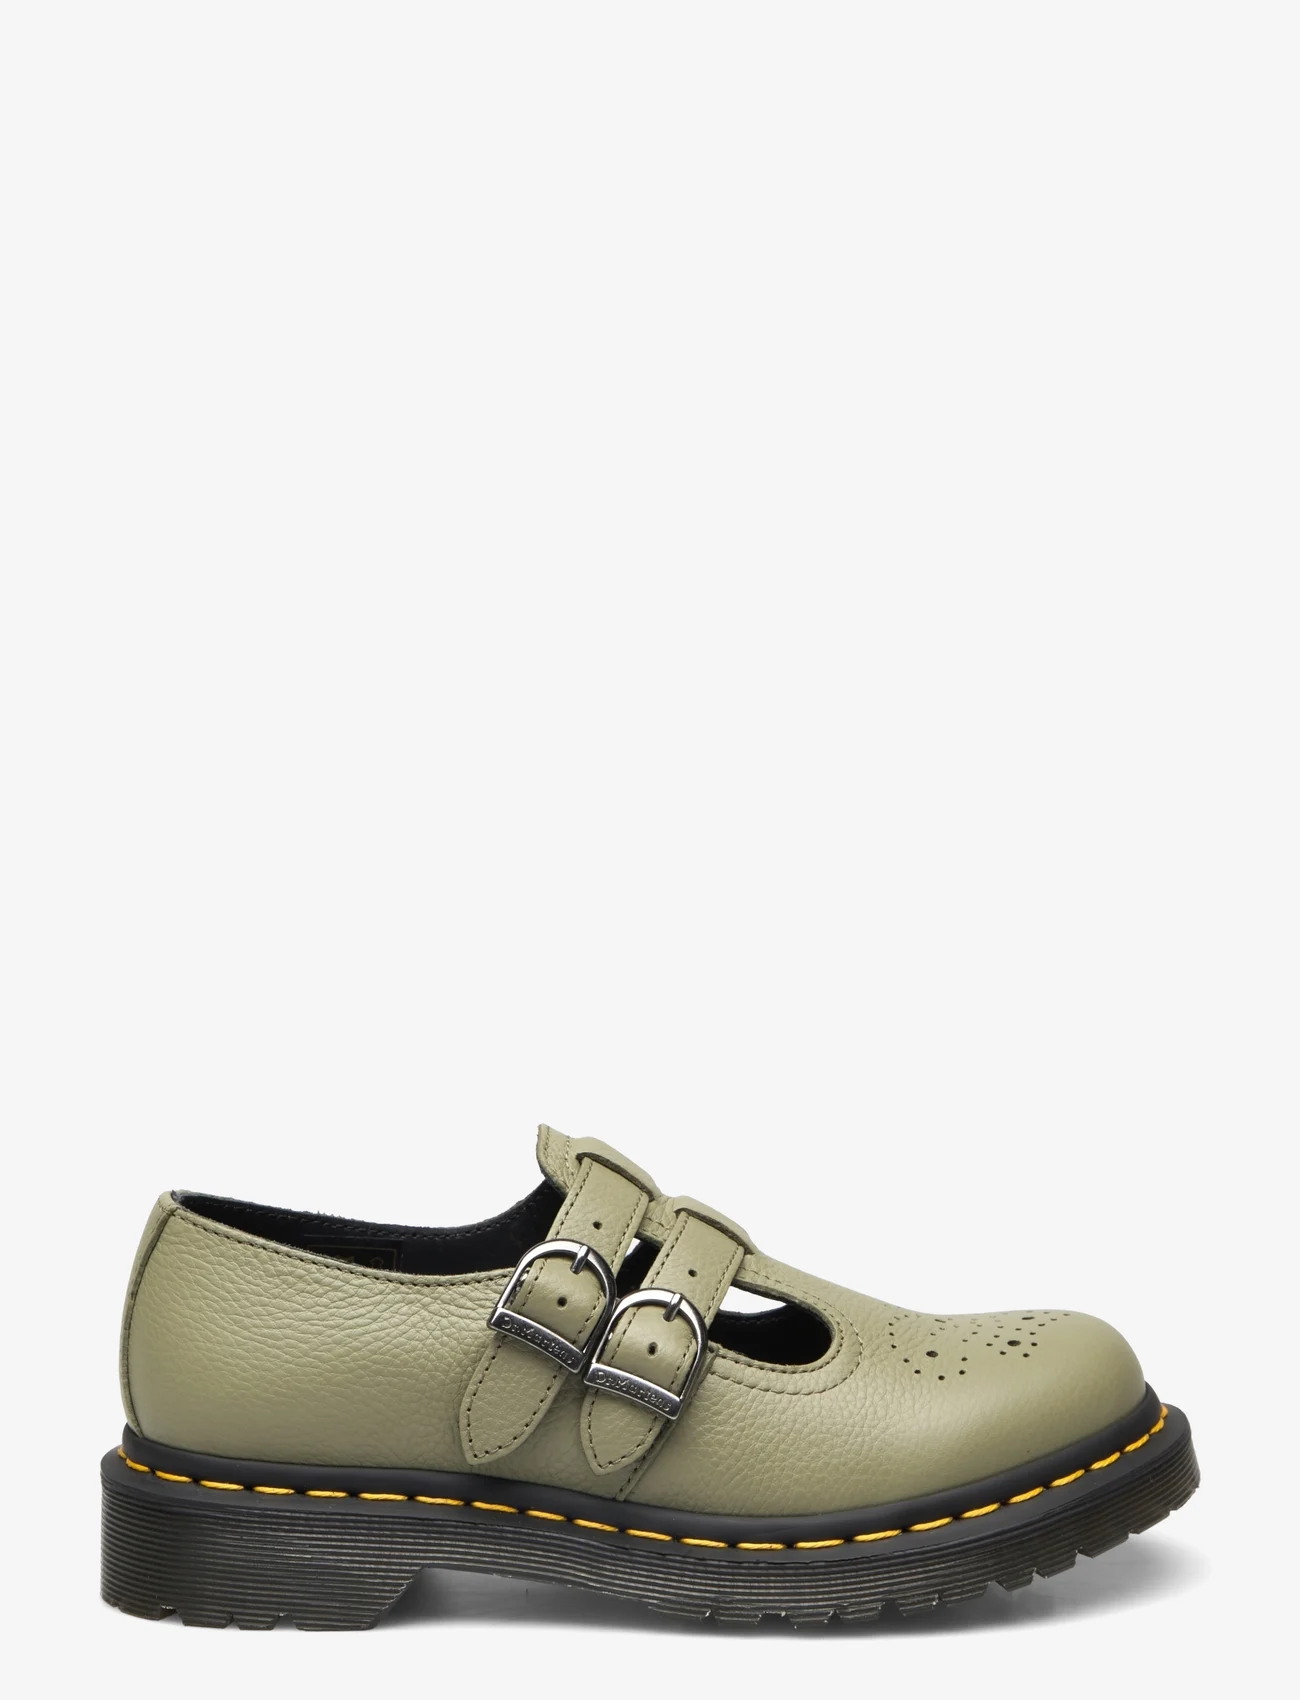 Dr. Martens - 8065 Mary Jane Muted Olive Virginia - mary jane shoes - muted olive - 1